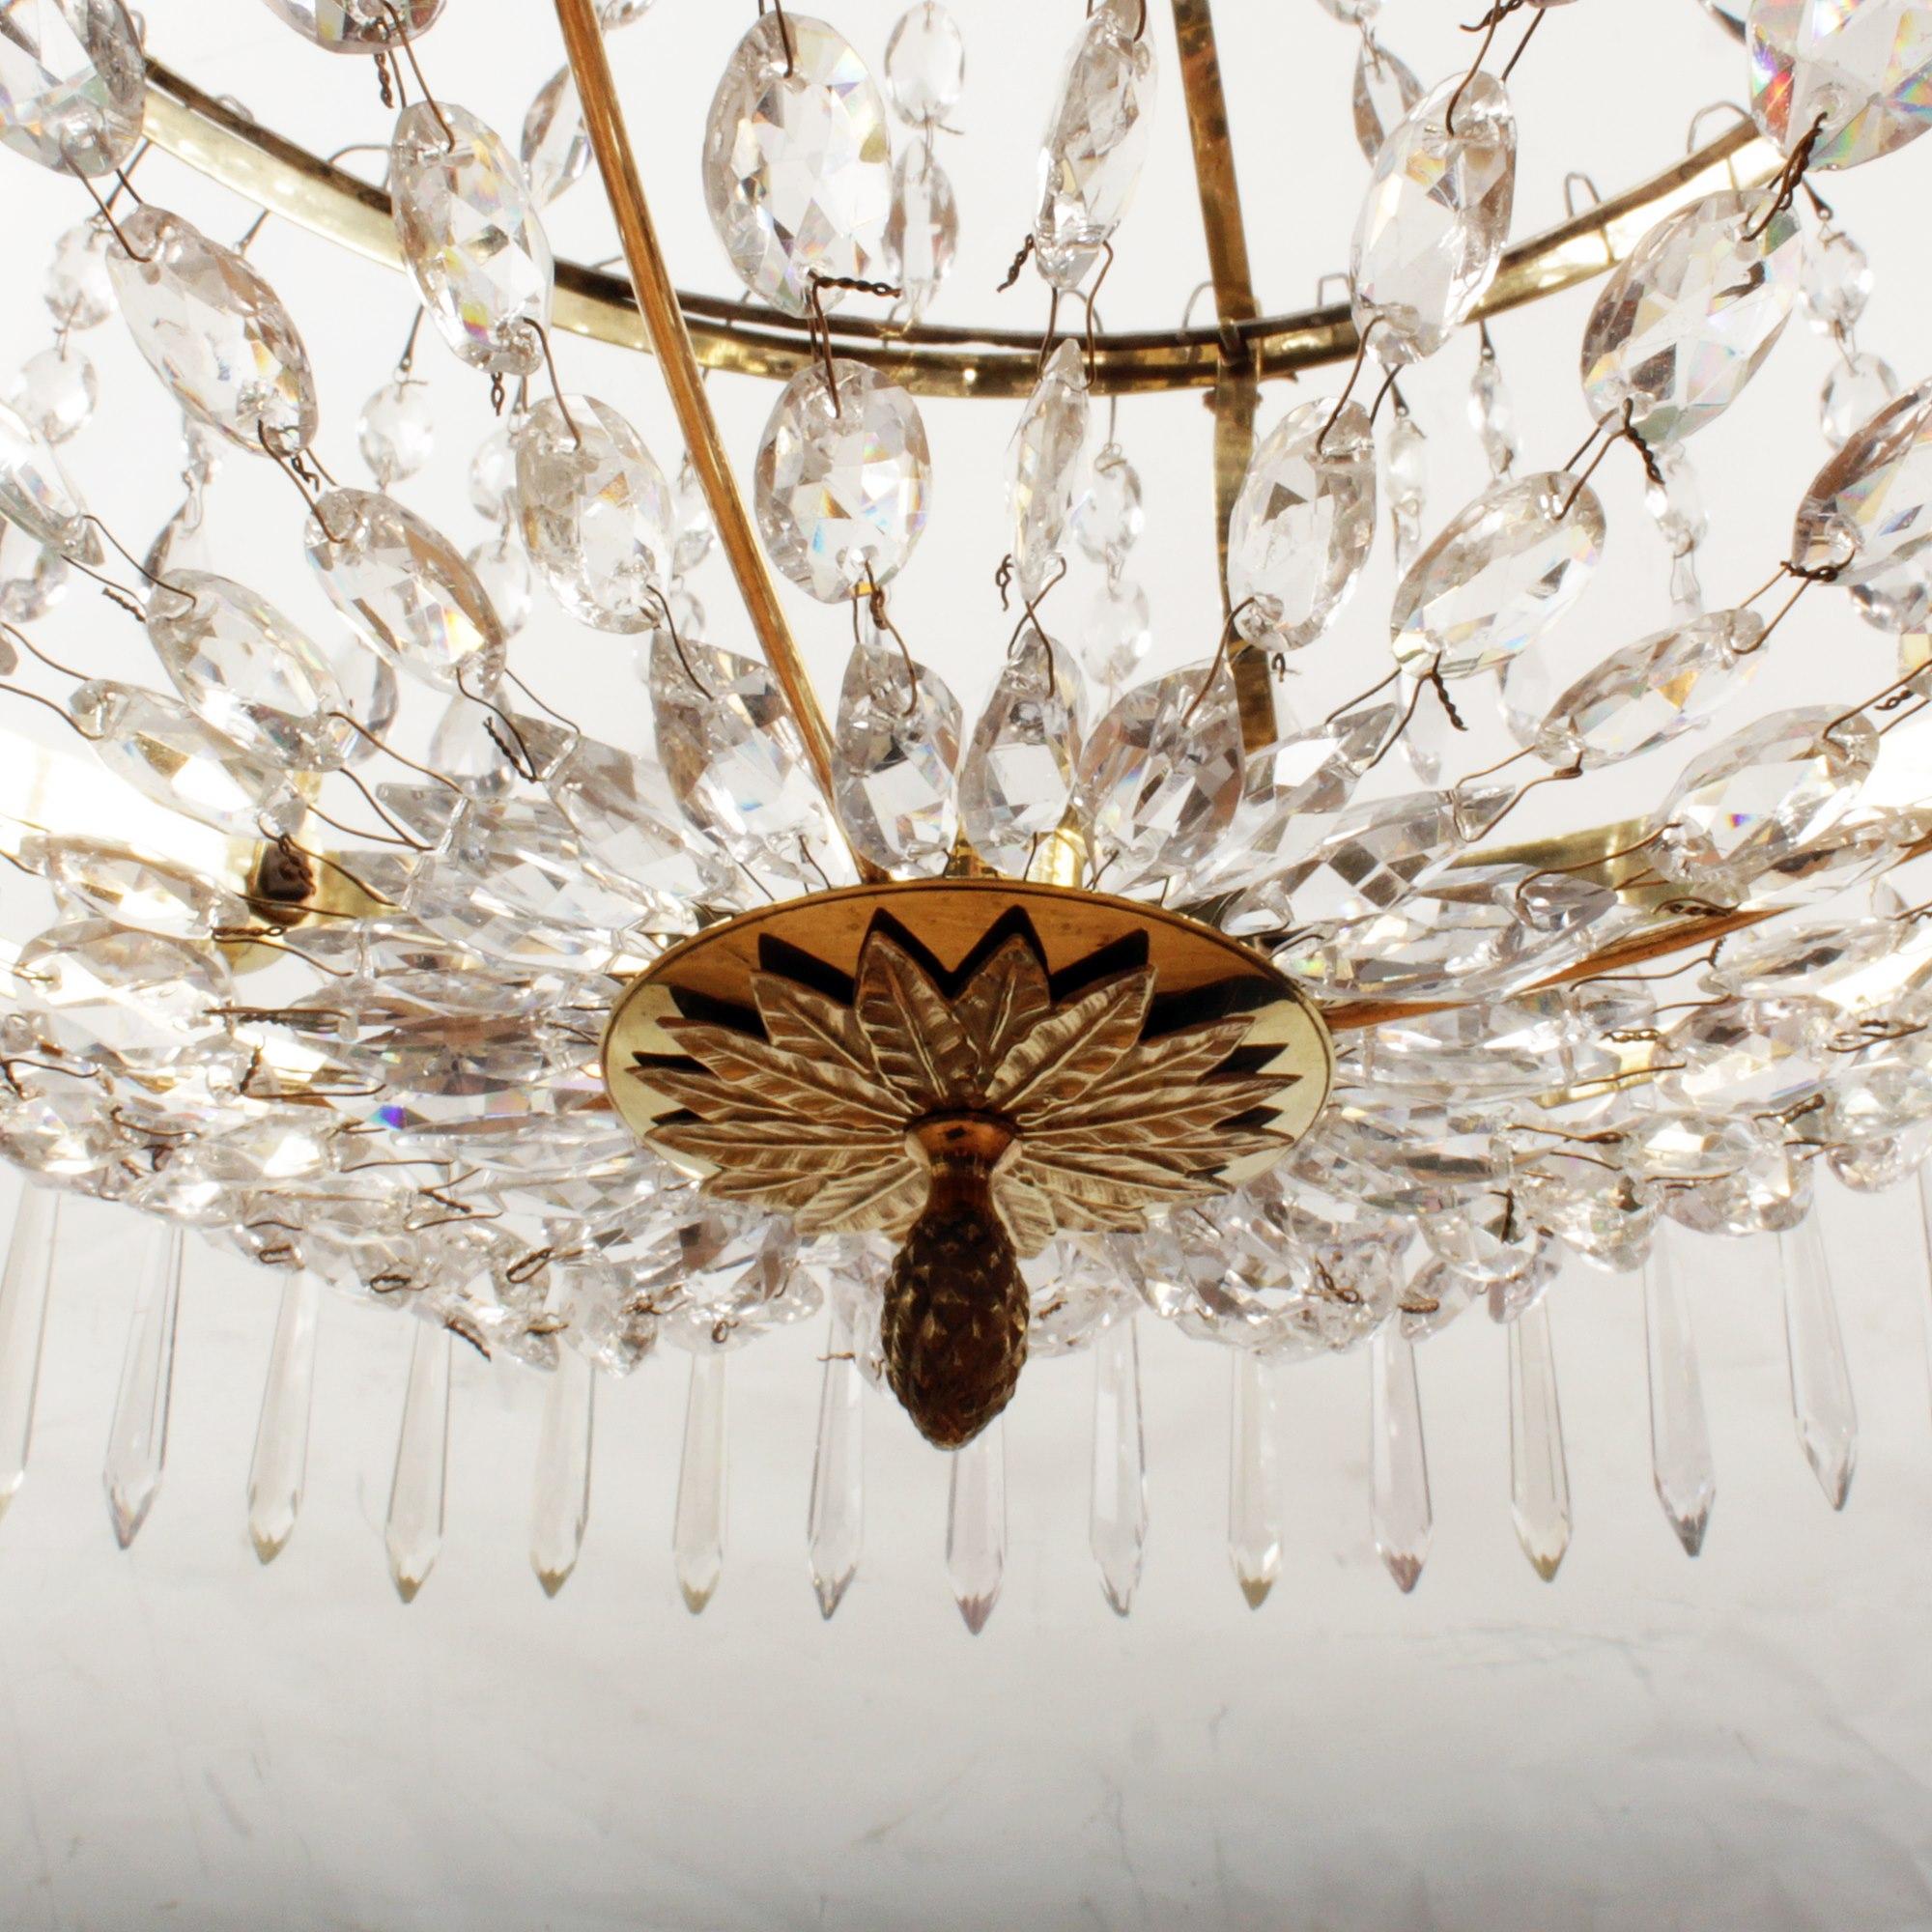 Early 18th century Gustavian chandelier made in Stockholm, circa 1820. A very elegant model and a true Swedish Classic from the Zenith of Swedish chandelier producing. The brass and bronze frame is gilded and the Bohemian crystal of the highest